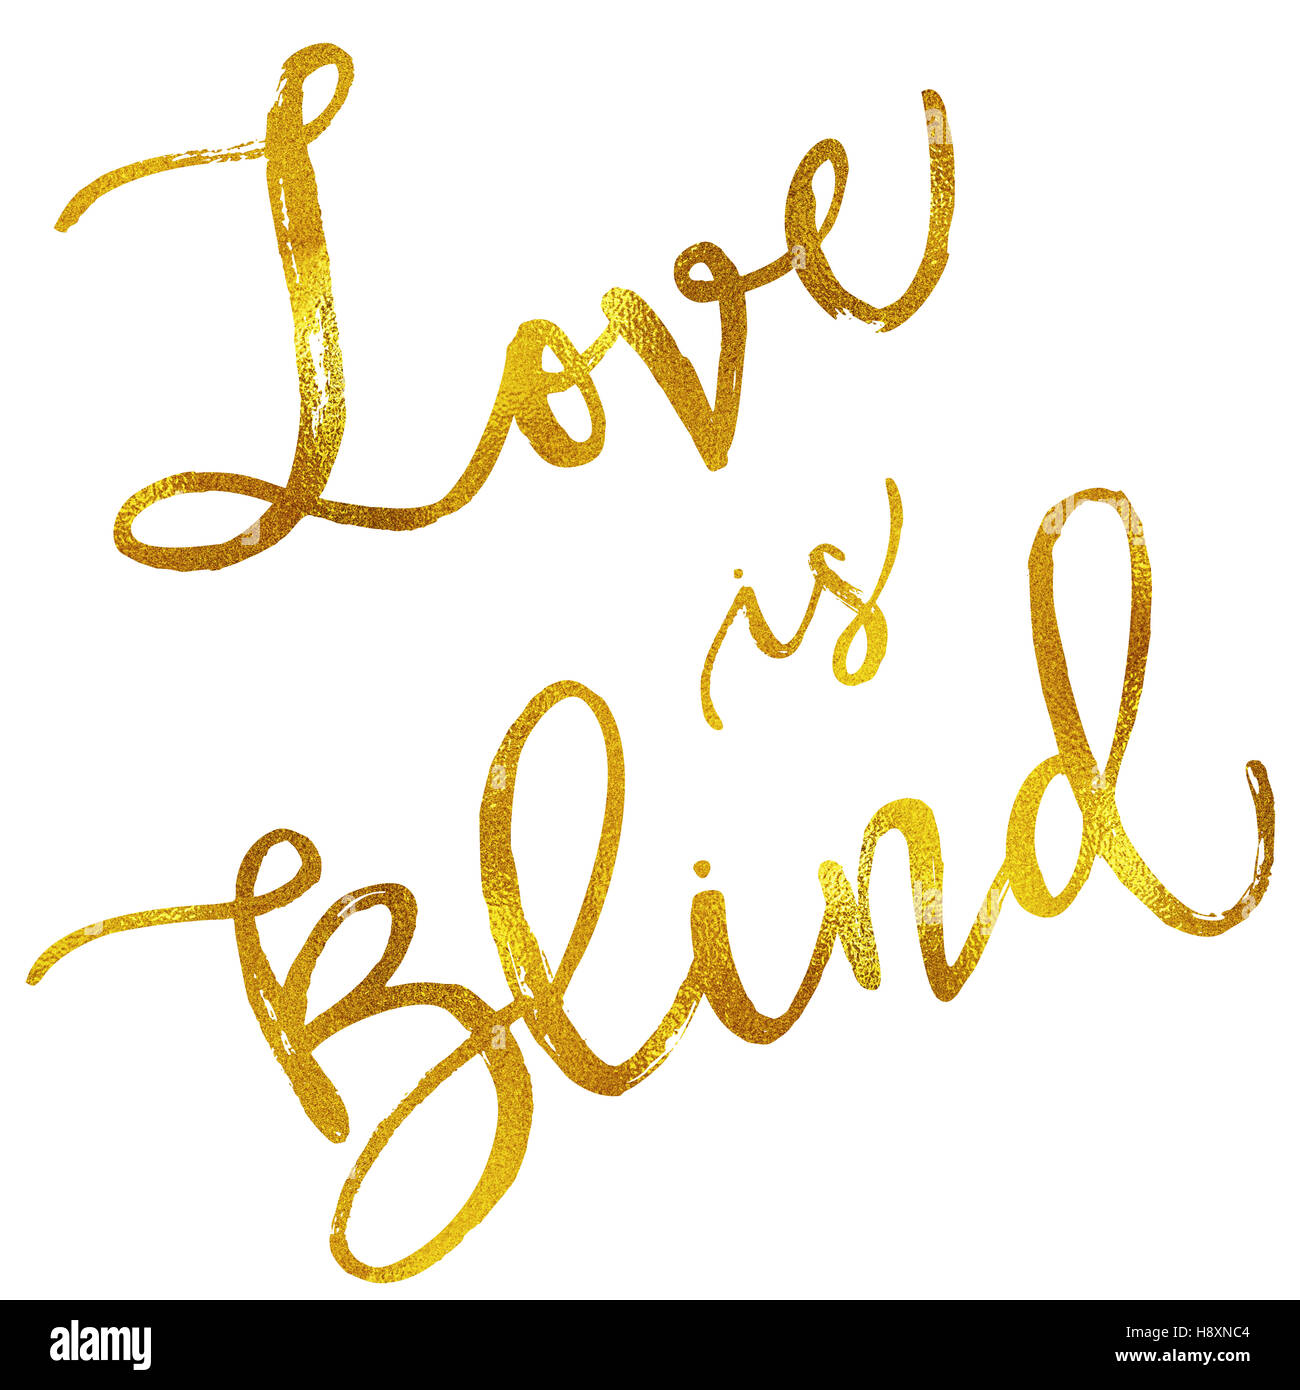 Love Is Blind Gold Faux Foil Metallic Motivational Quote Isolated Stock Photo